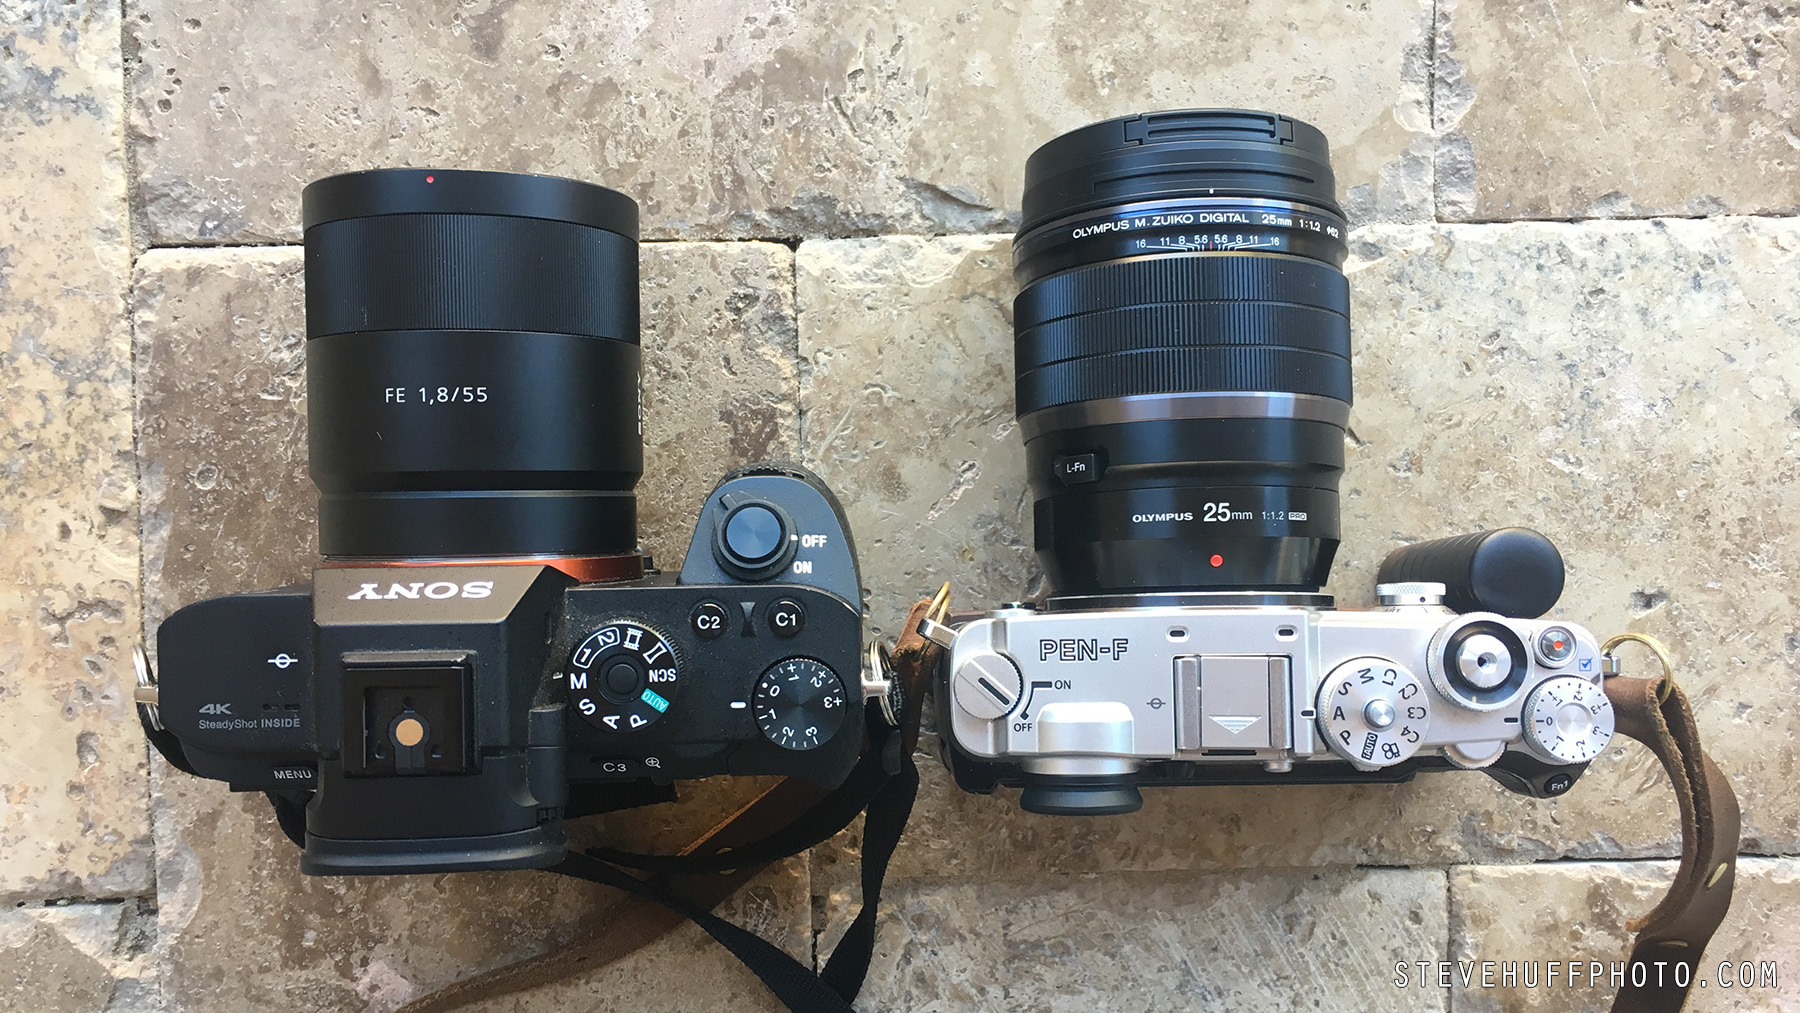 niettemin toelage graven Crazy Comparison! Sony A7RII and 55 1.8 vs Olympus PEN-F and 25 f/1.2 |  Steve Huff Hi-Fi and Photo